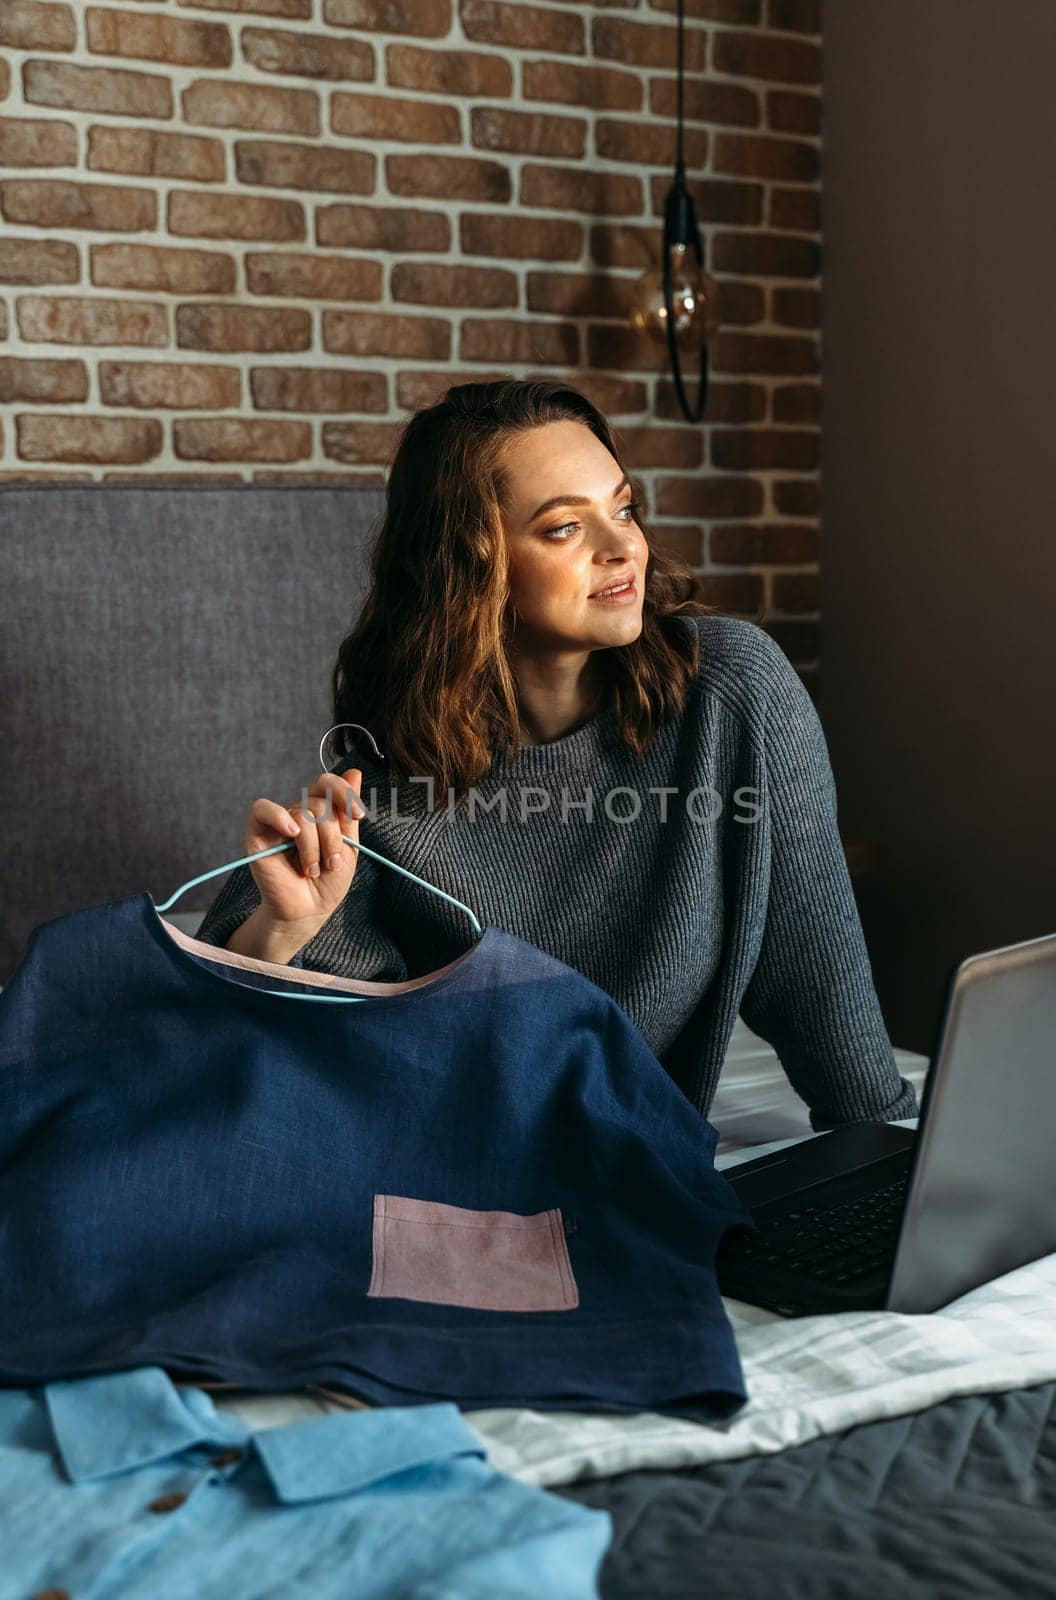 A young woman sits on a bed and admires her purchases made through an online store.